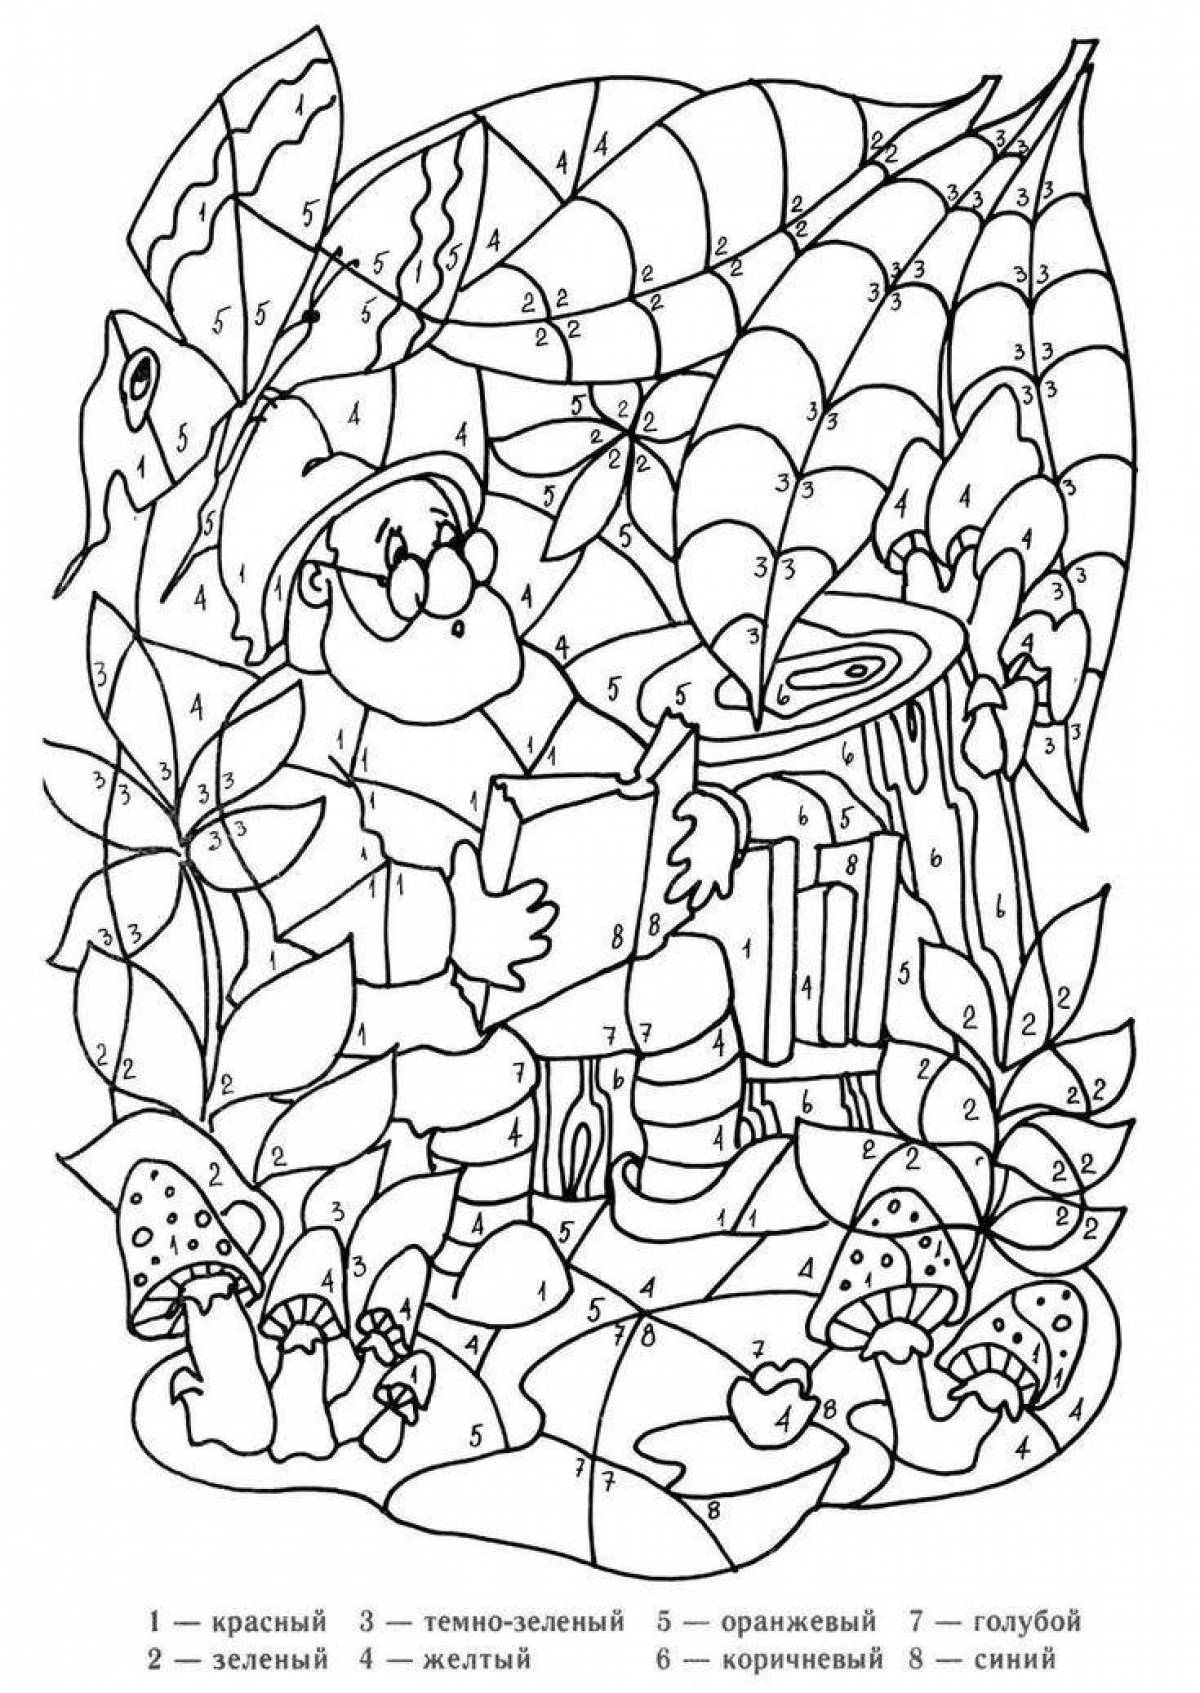 Colorful coloring book interesting for children